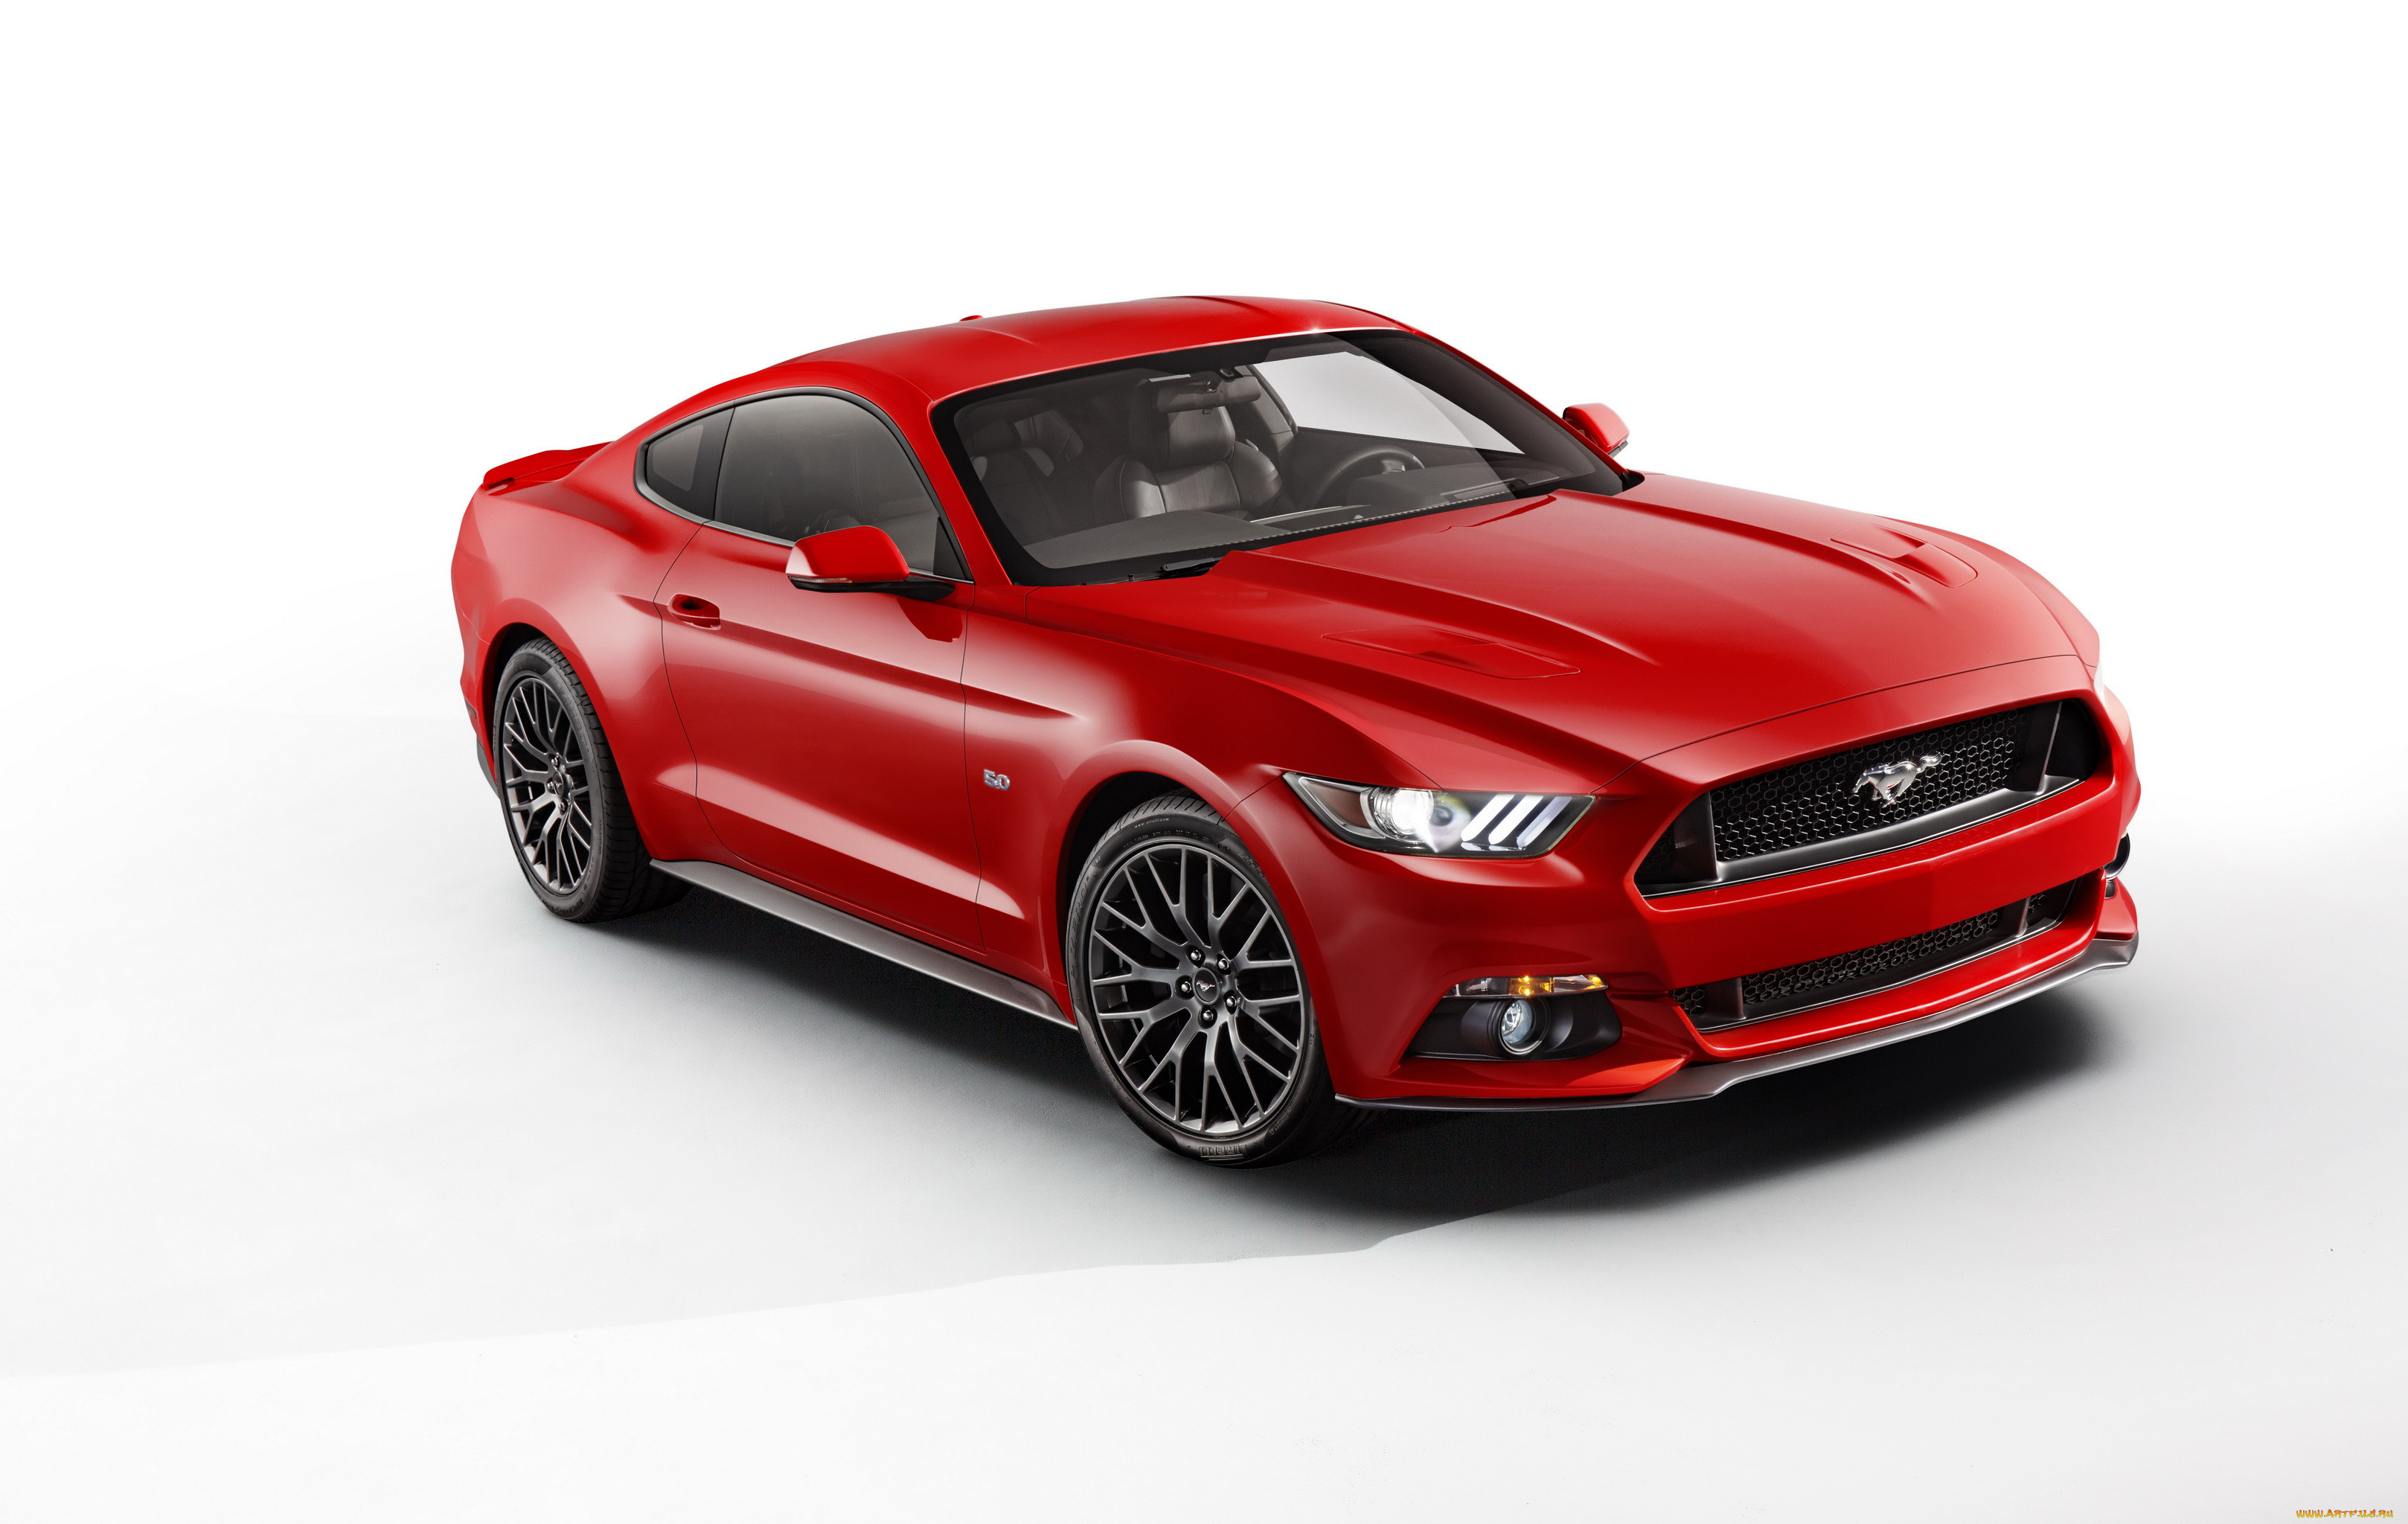 2014 ford mustang, , mustang, , ford